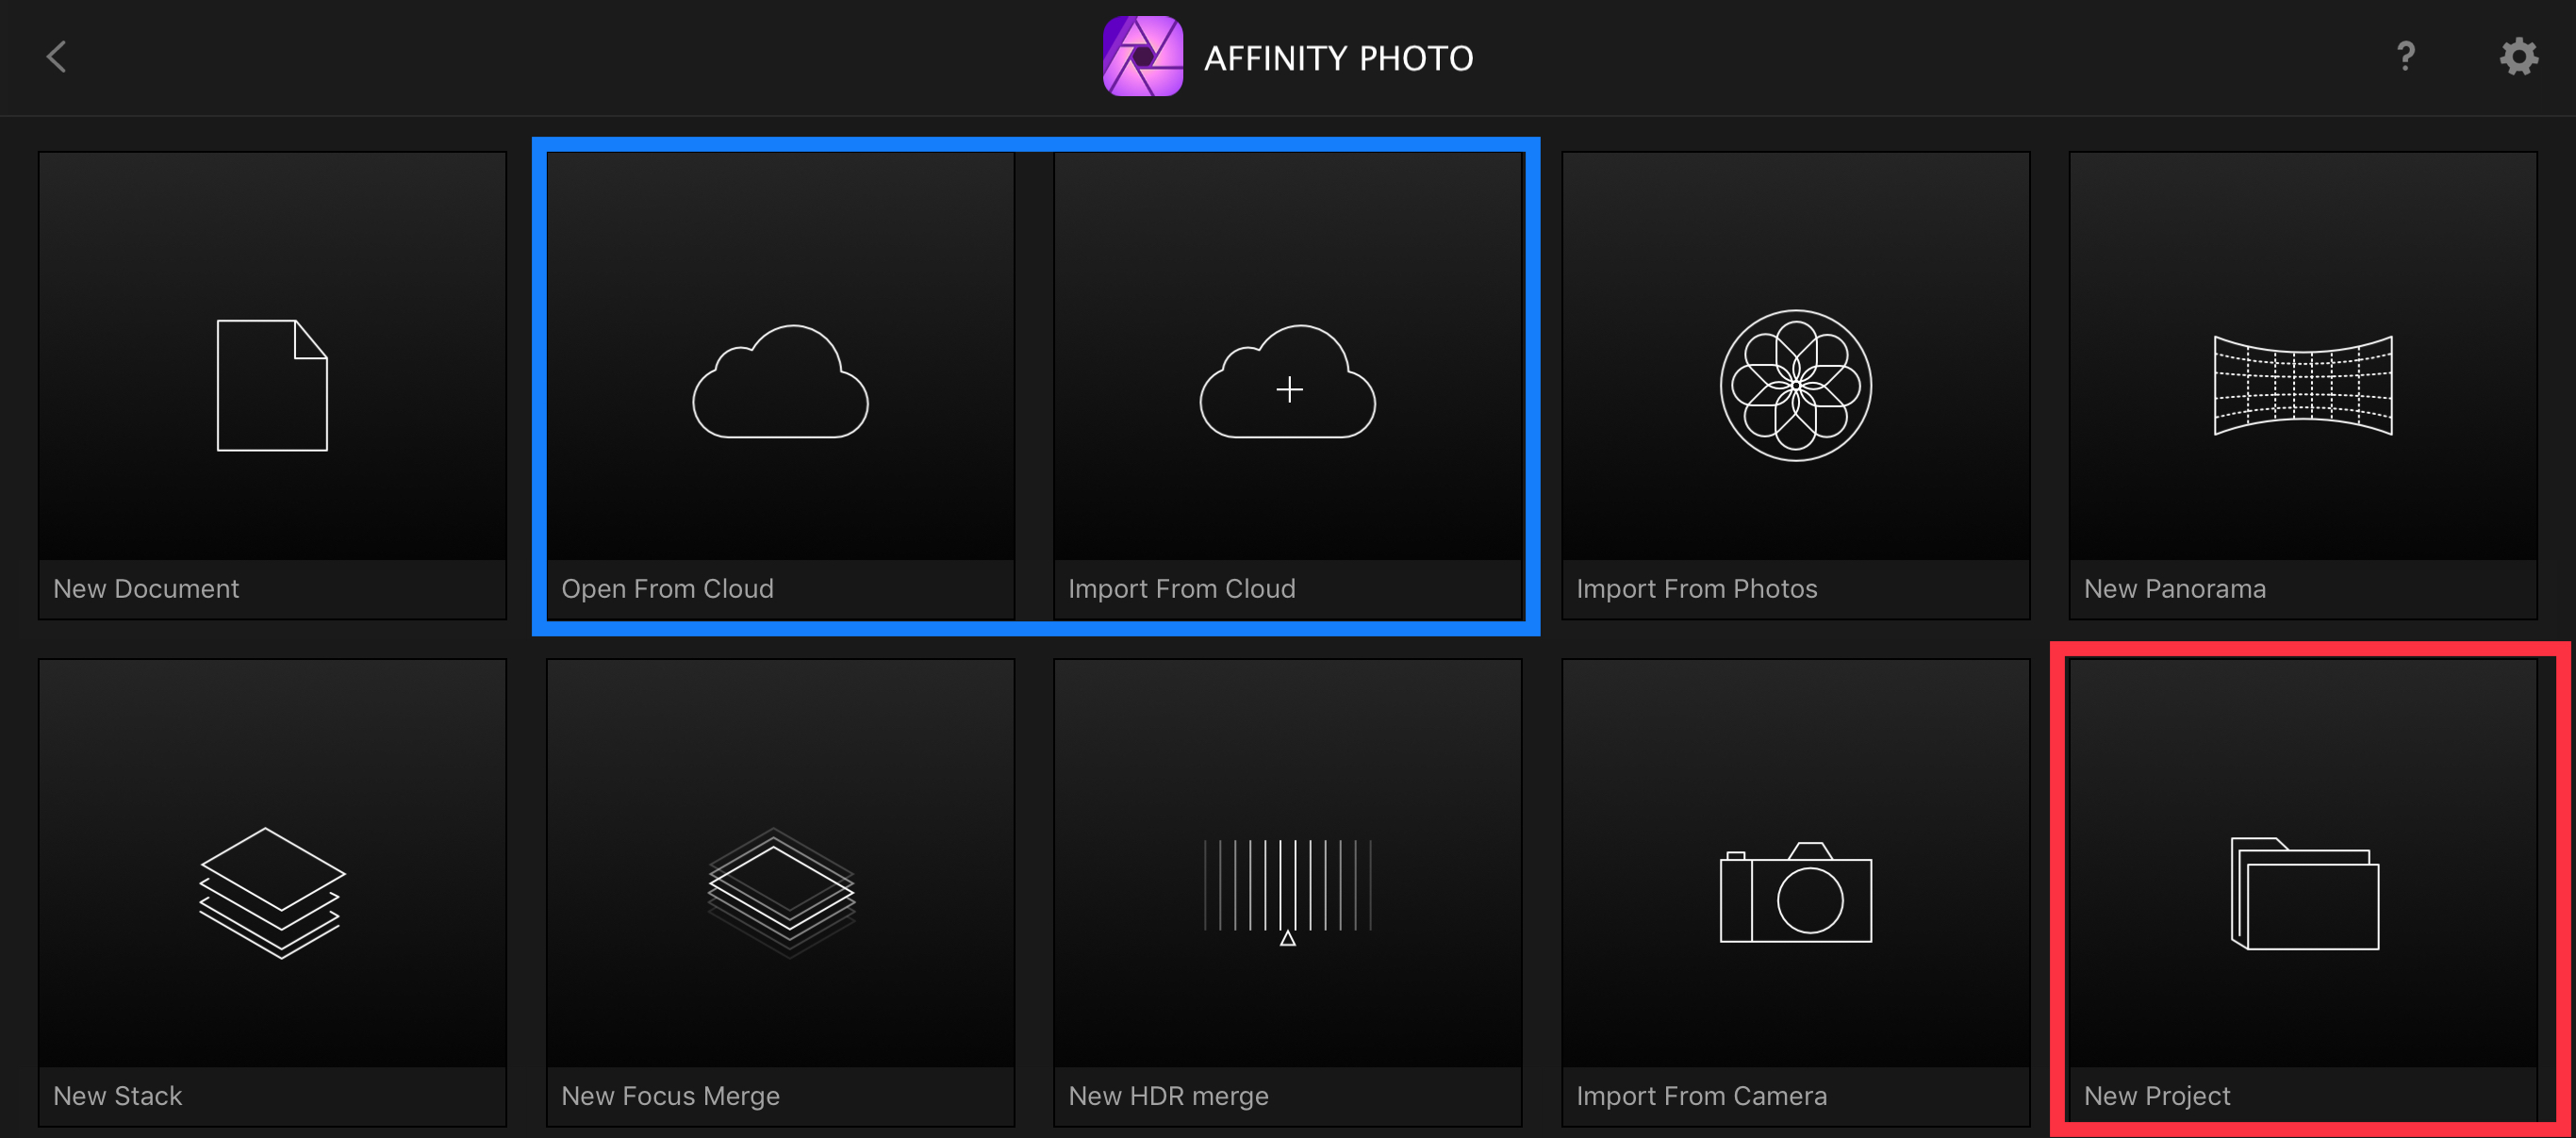 Affinity Photo download the last version for iphone